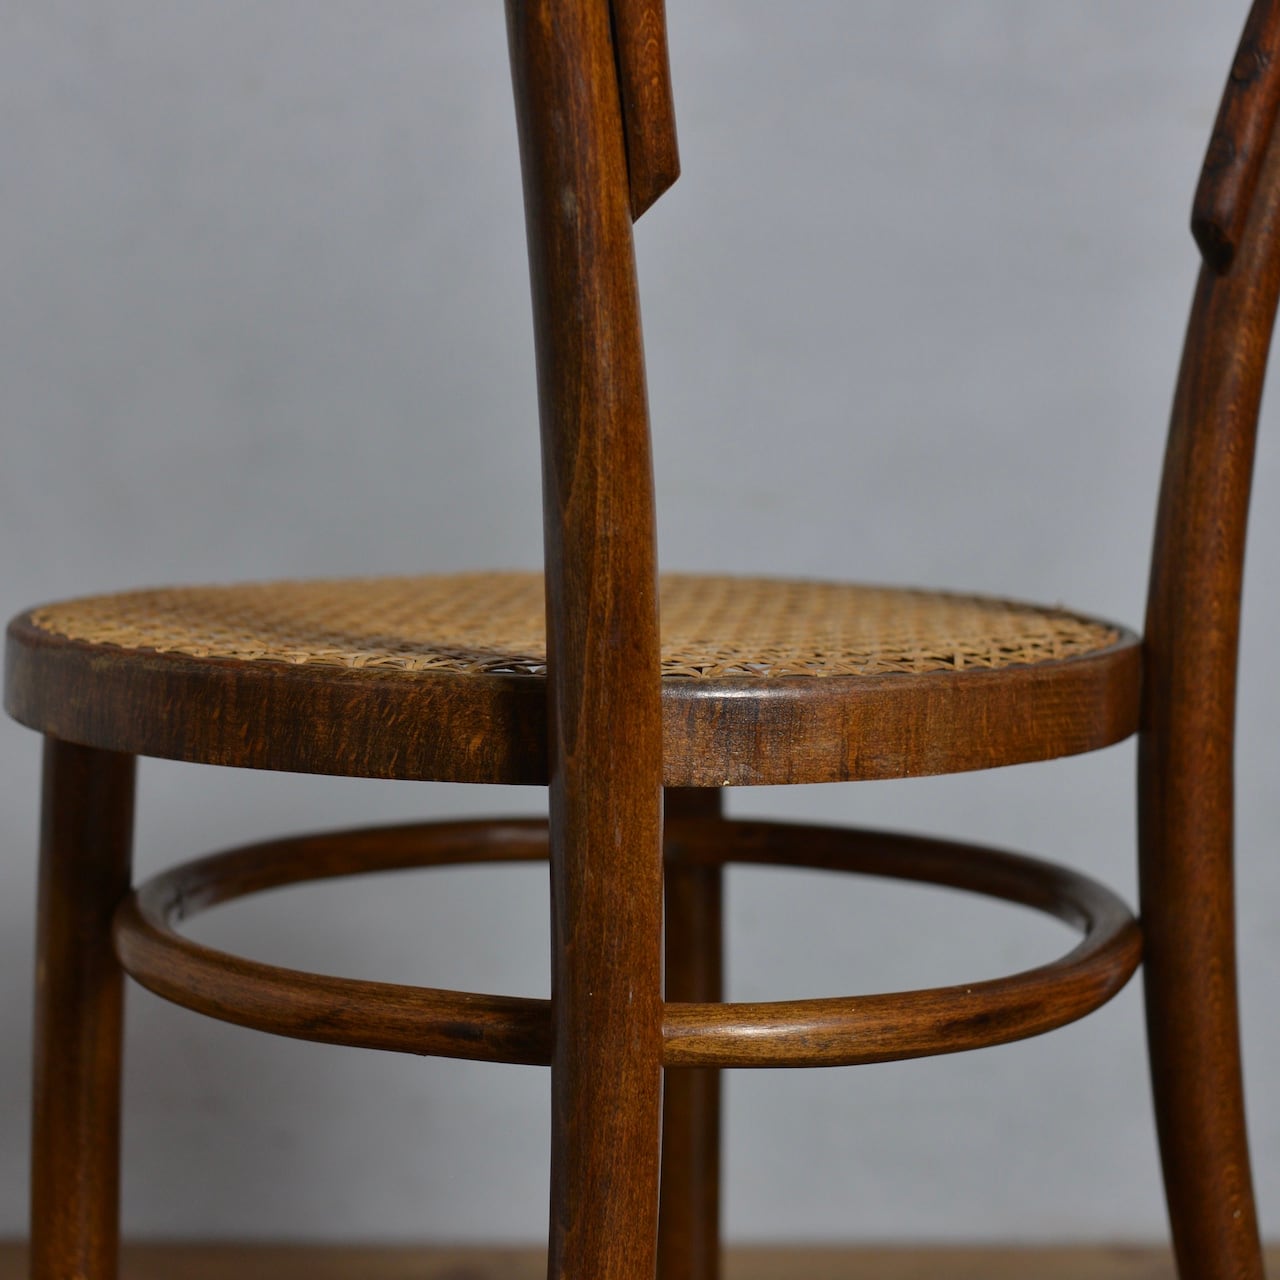 Double Loop Bentwood Chair / ダブルループ ベントウッド チェア　 〈ダイニングチェア・椅子・曲木・籐〉SB2010-0003 | SHABBY'S MARKETPLACE　アンティーク・ヴィンテージ 家具や雑貨のお店  powered by BASE